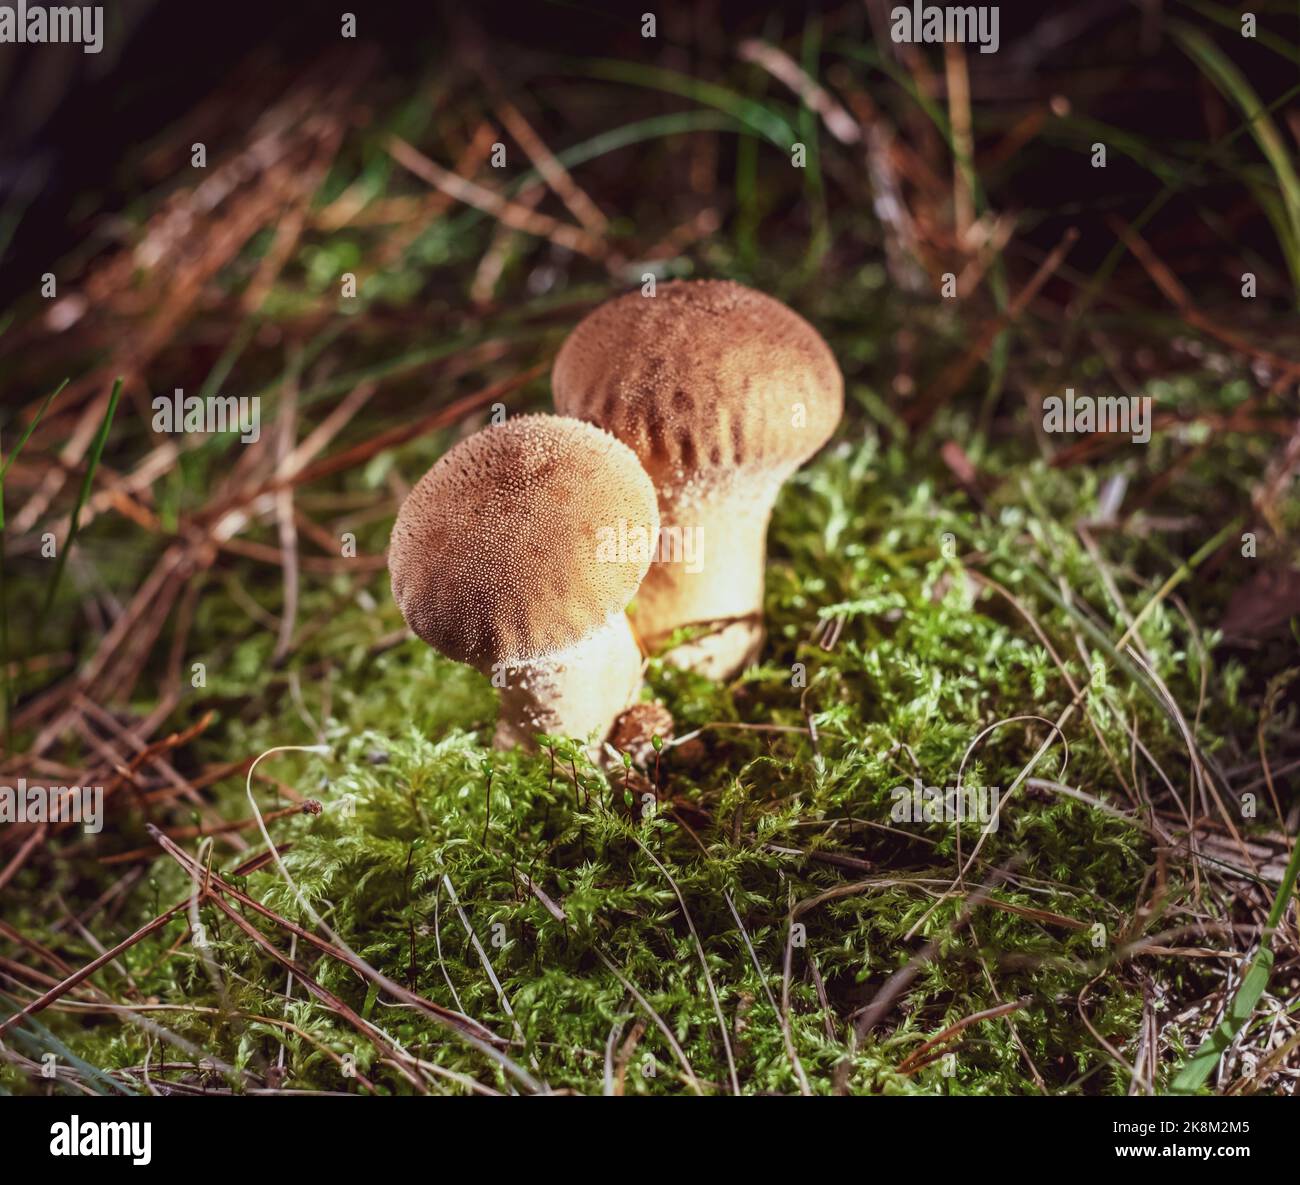 Close-up of a fungus called Common Puffball - Lycoperdon Perlatum, common puffball, warted puffball, gem-studded puffball Stock Photo